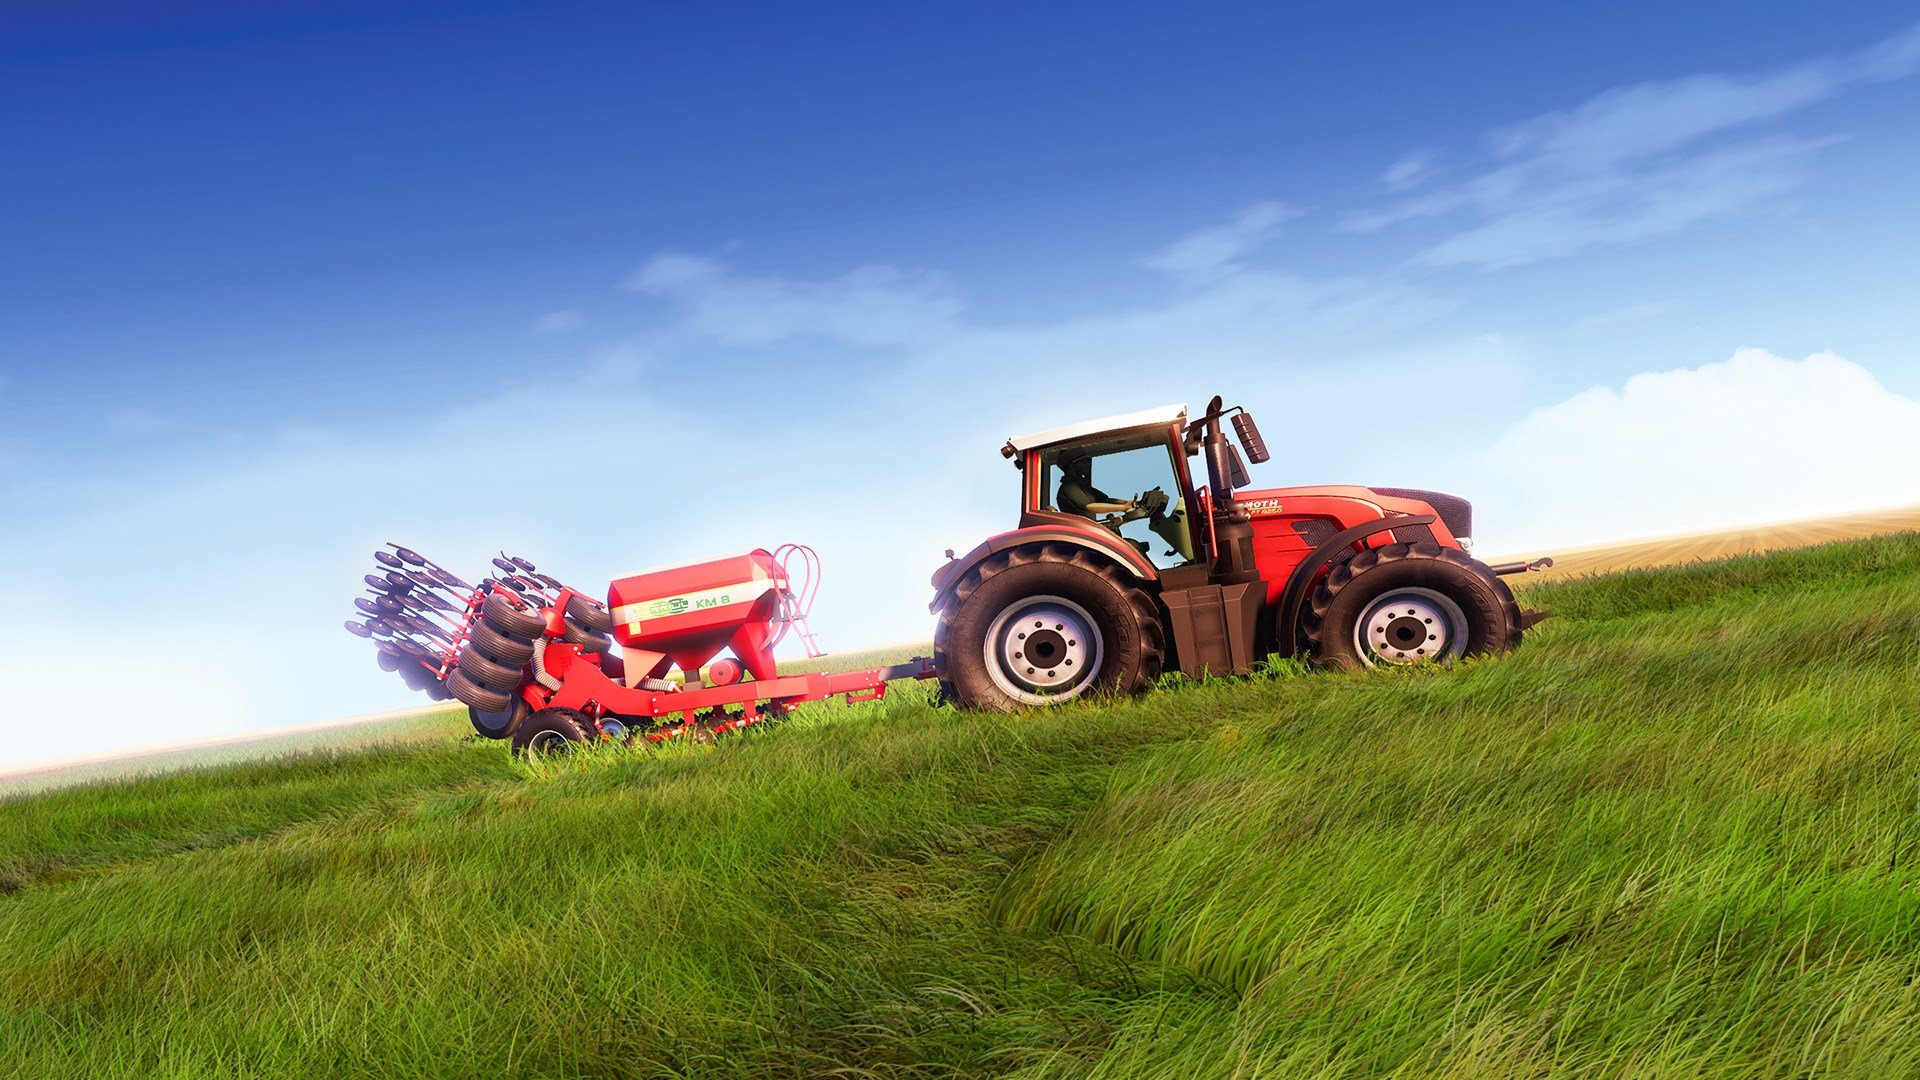 Real Farm cover image